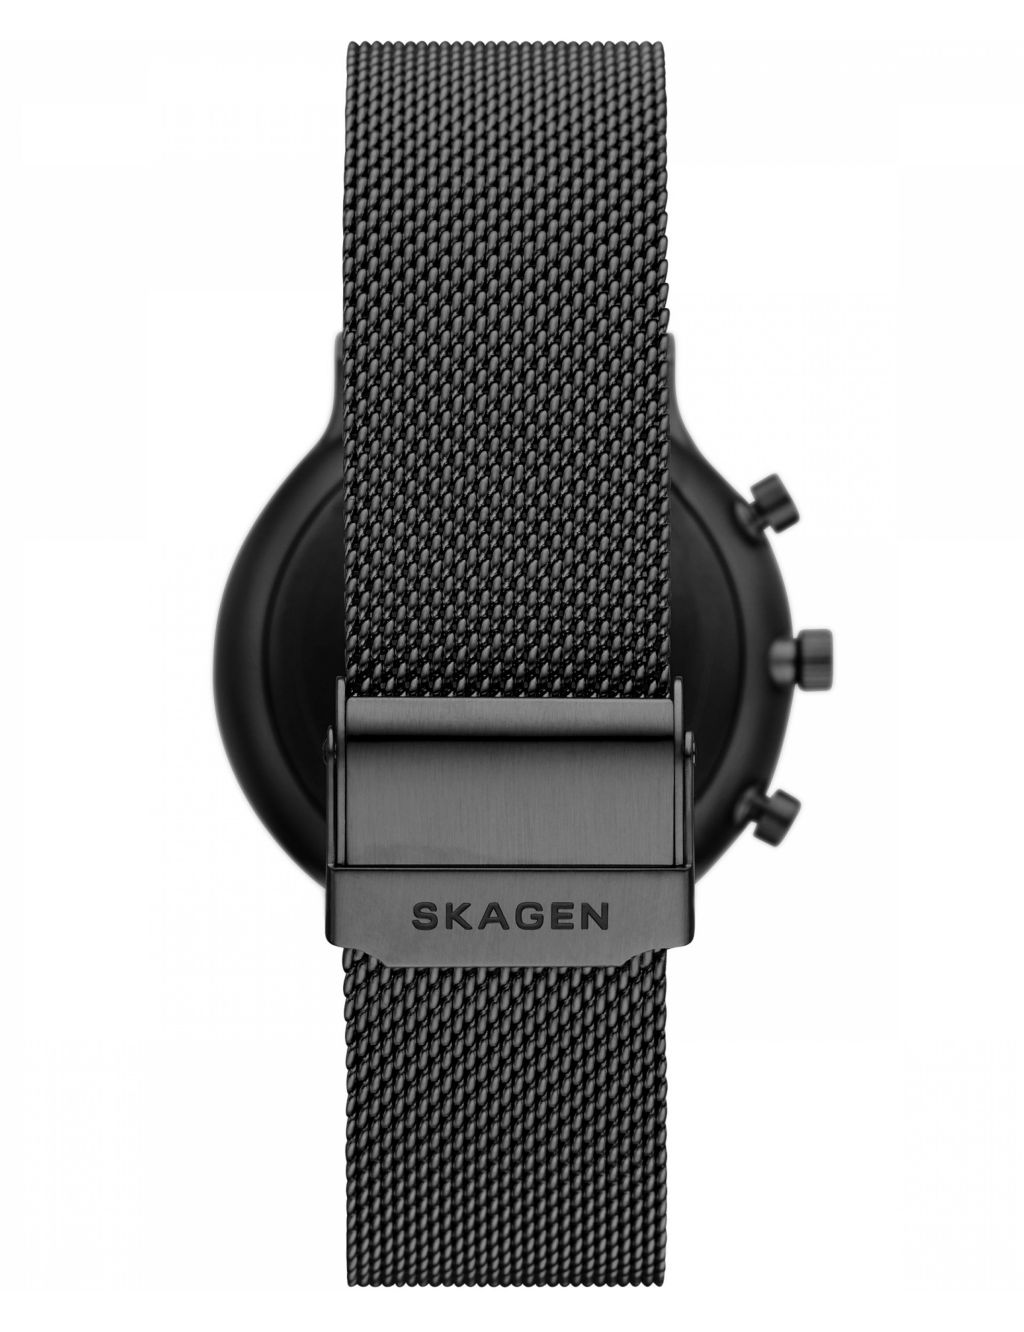 Skagen Anchor Chronograph Black Stainless Steel Watch image 6